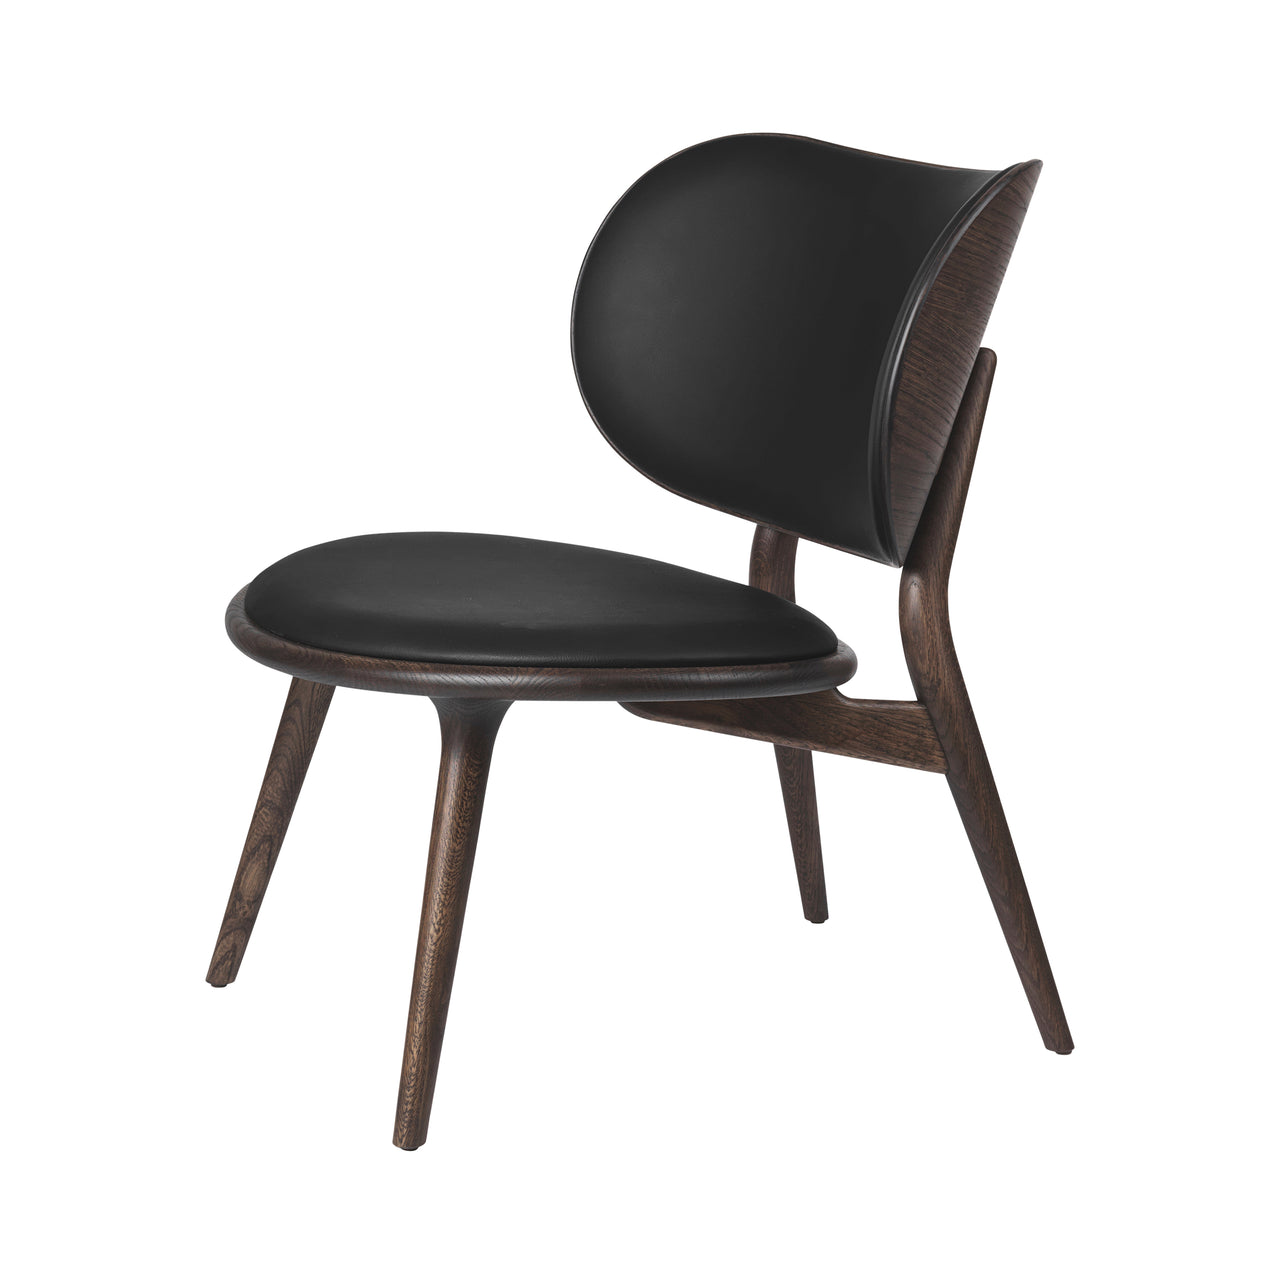 The Lounge Chair: Grey Stained Oak + Black Leather